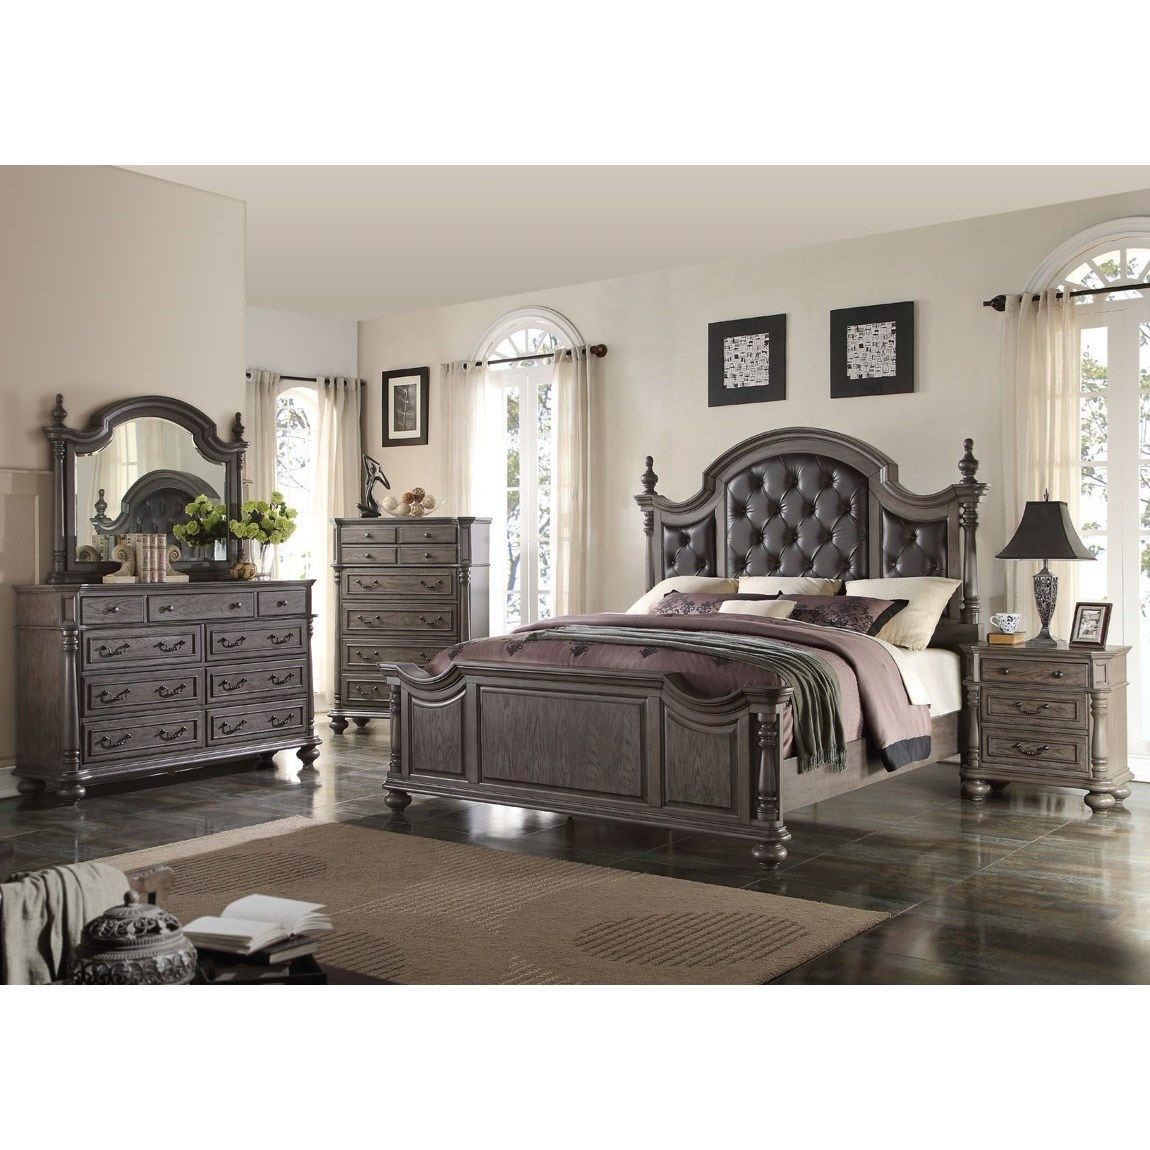 Monticello King Bedroom Group New Classic In 2019 in sizing 1150 X 1150